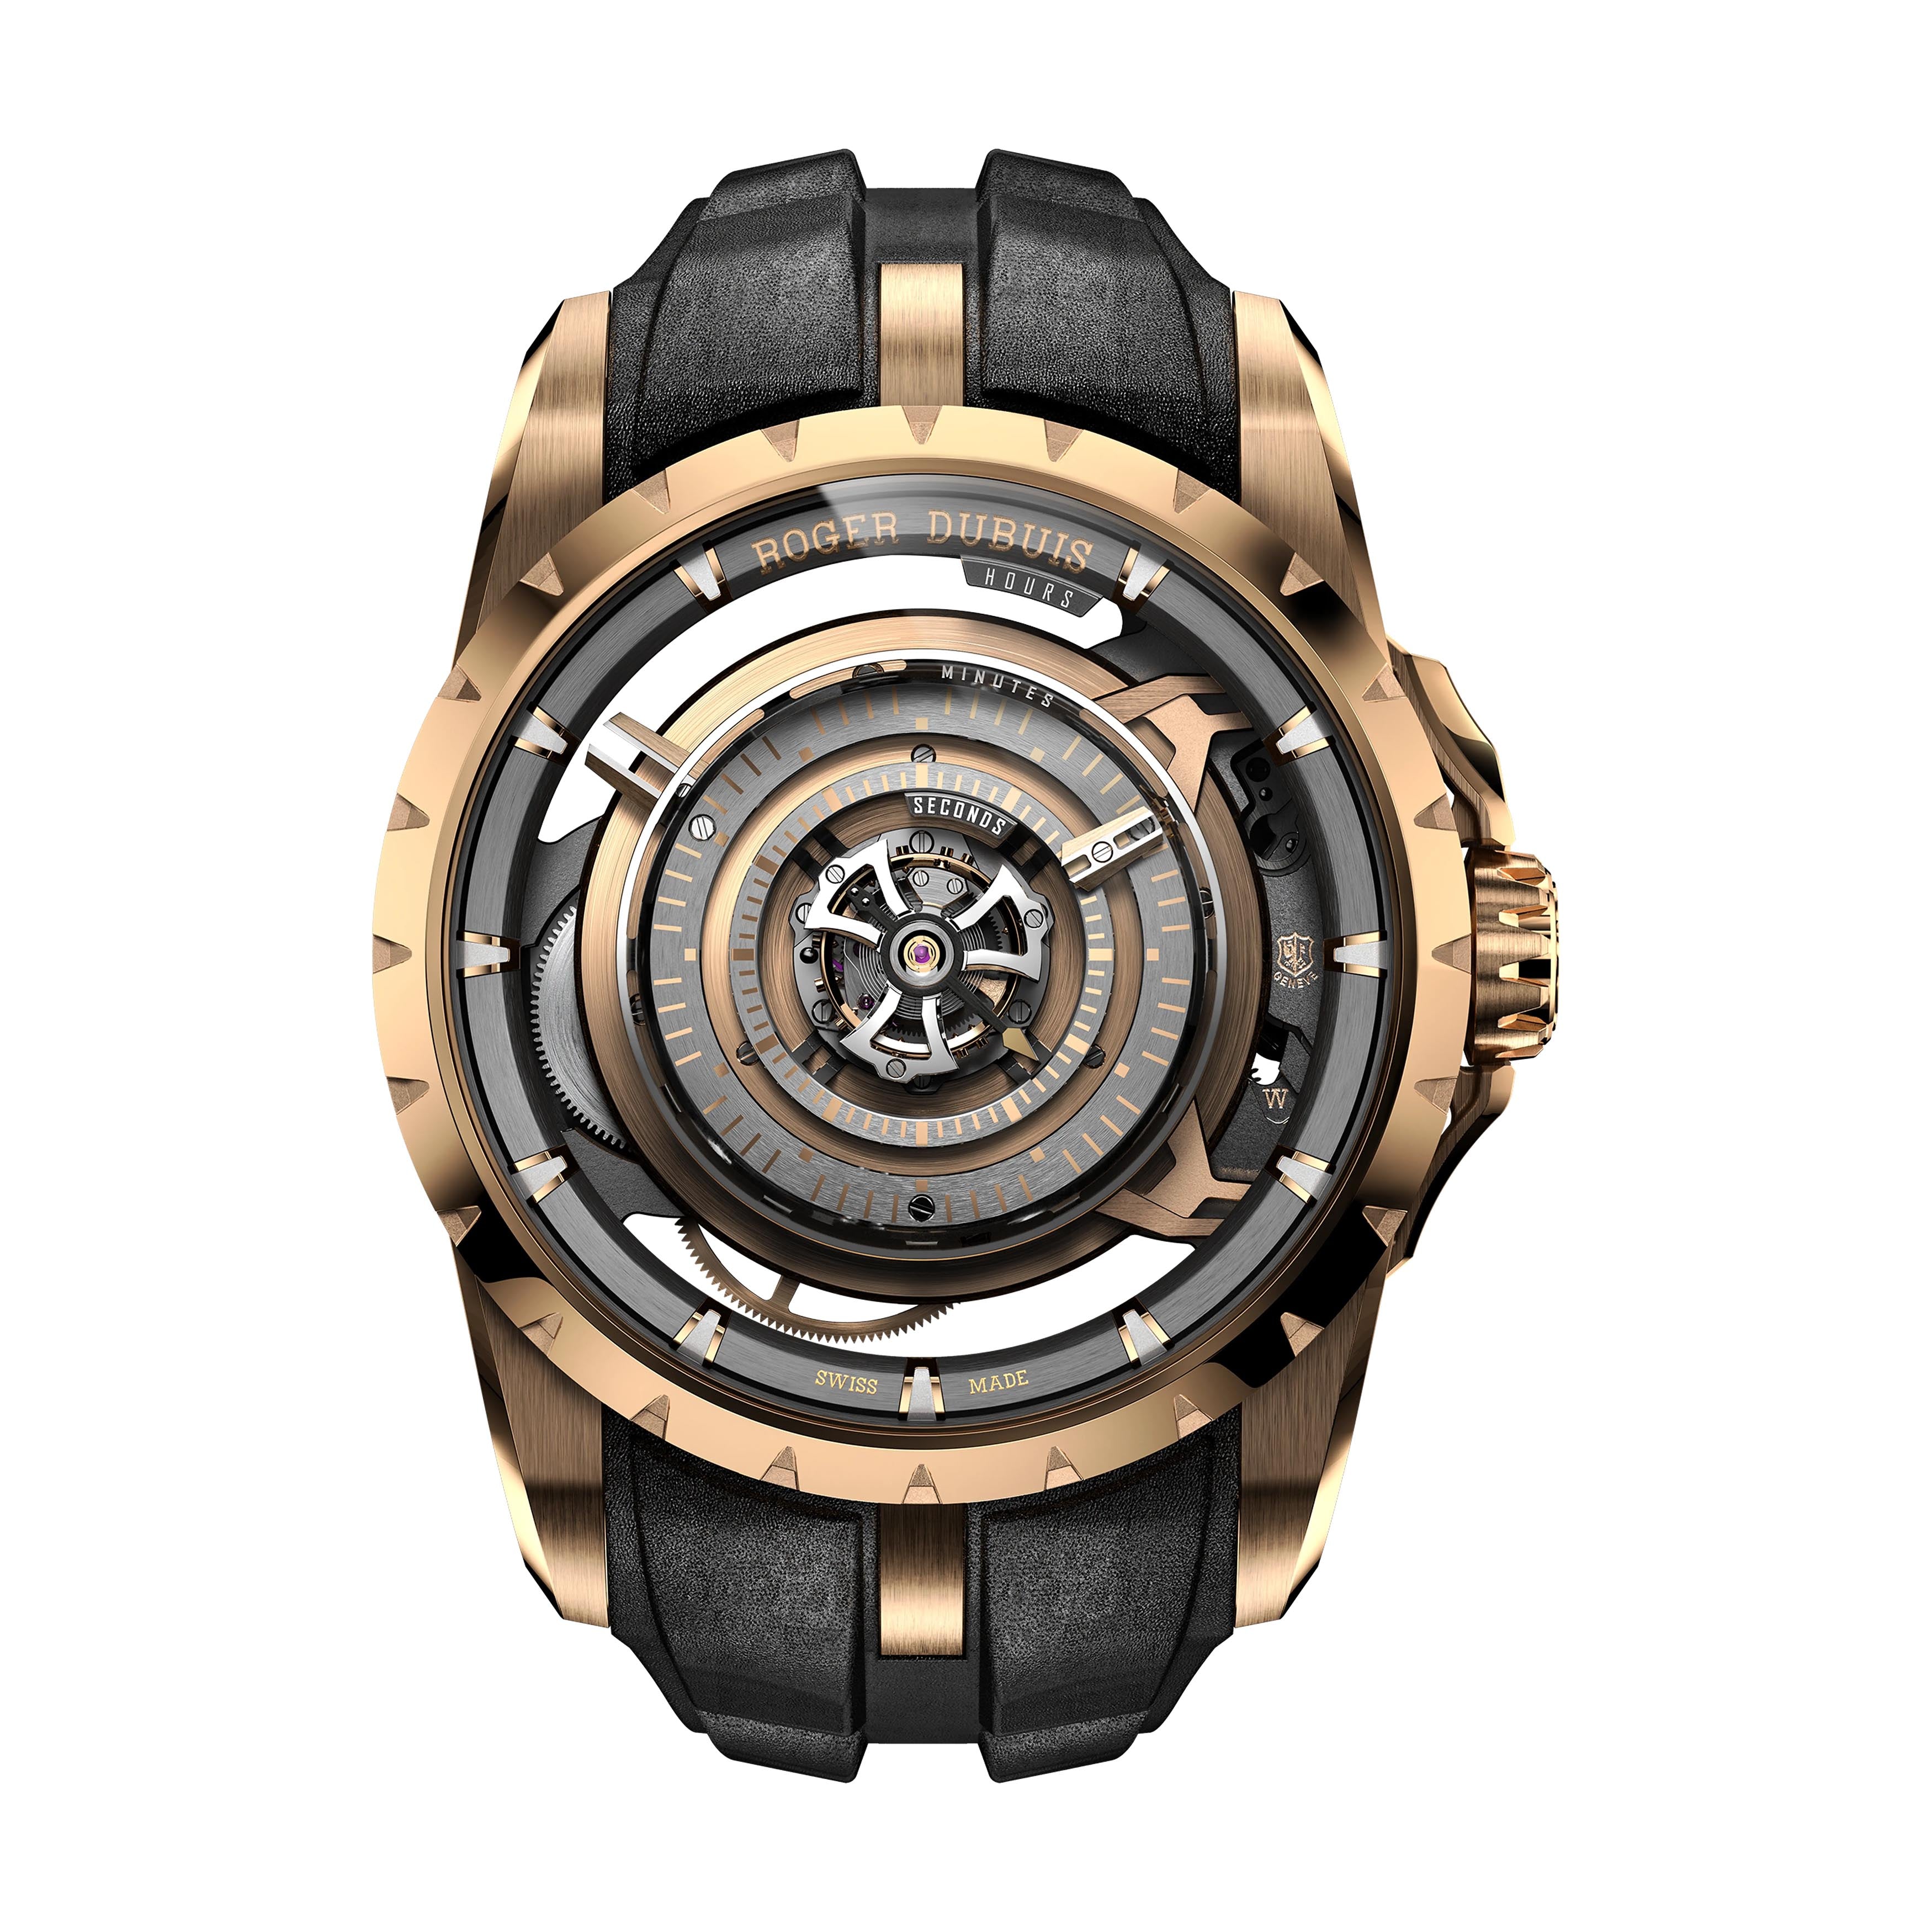 Roger Dubuis Orbis In Mechina Central Monotourbillon Watch, 45mm Skeleton Dial, RDDBEX1119